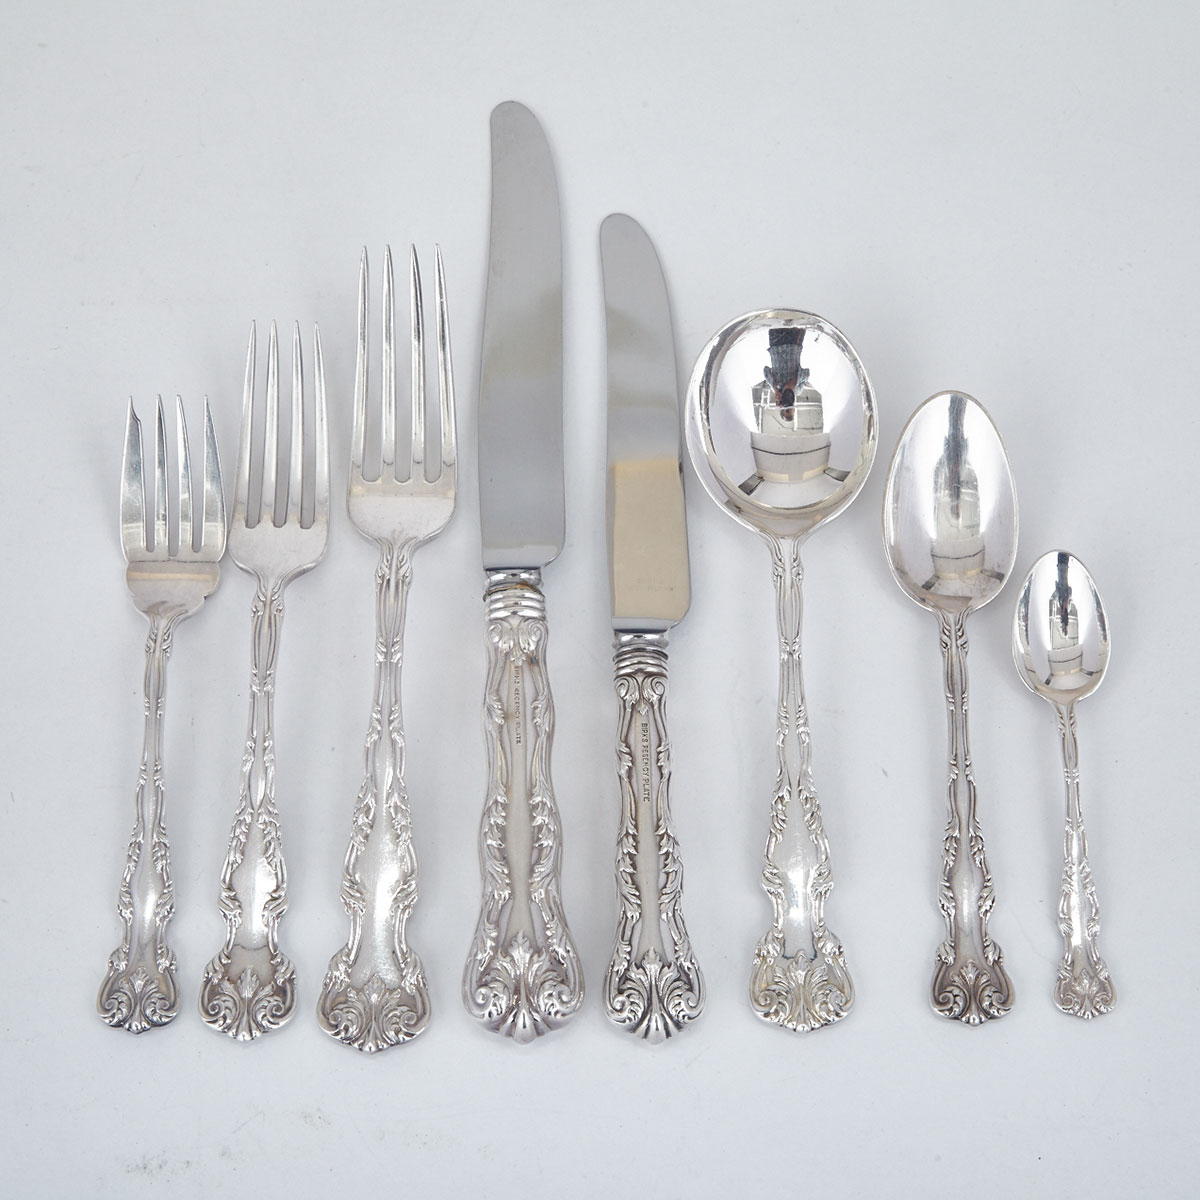 Canadian ‘Regency’ Silver Plated ‘Chatillon’ (or ‘Cotillion’) Pattern Flatware Service, Henry Birks & Sons, 20th century